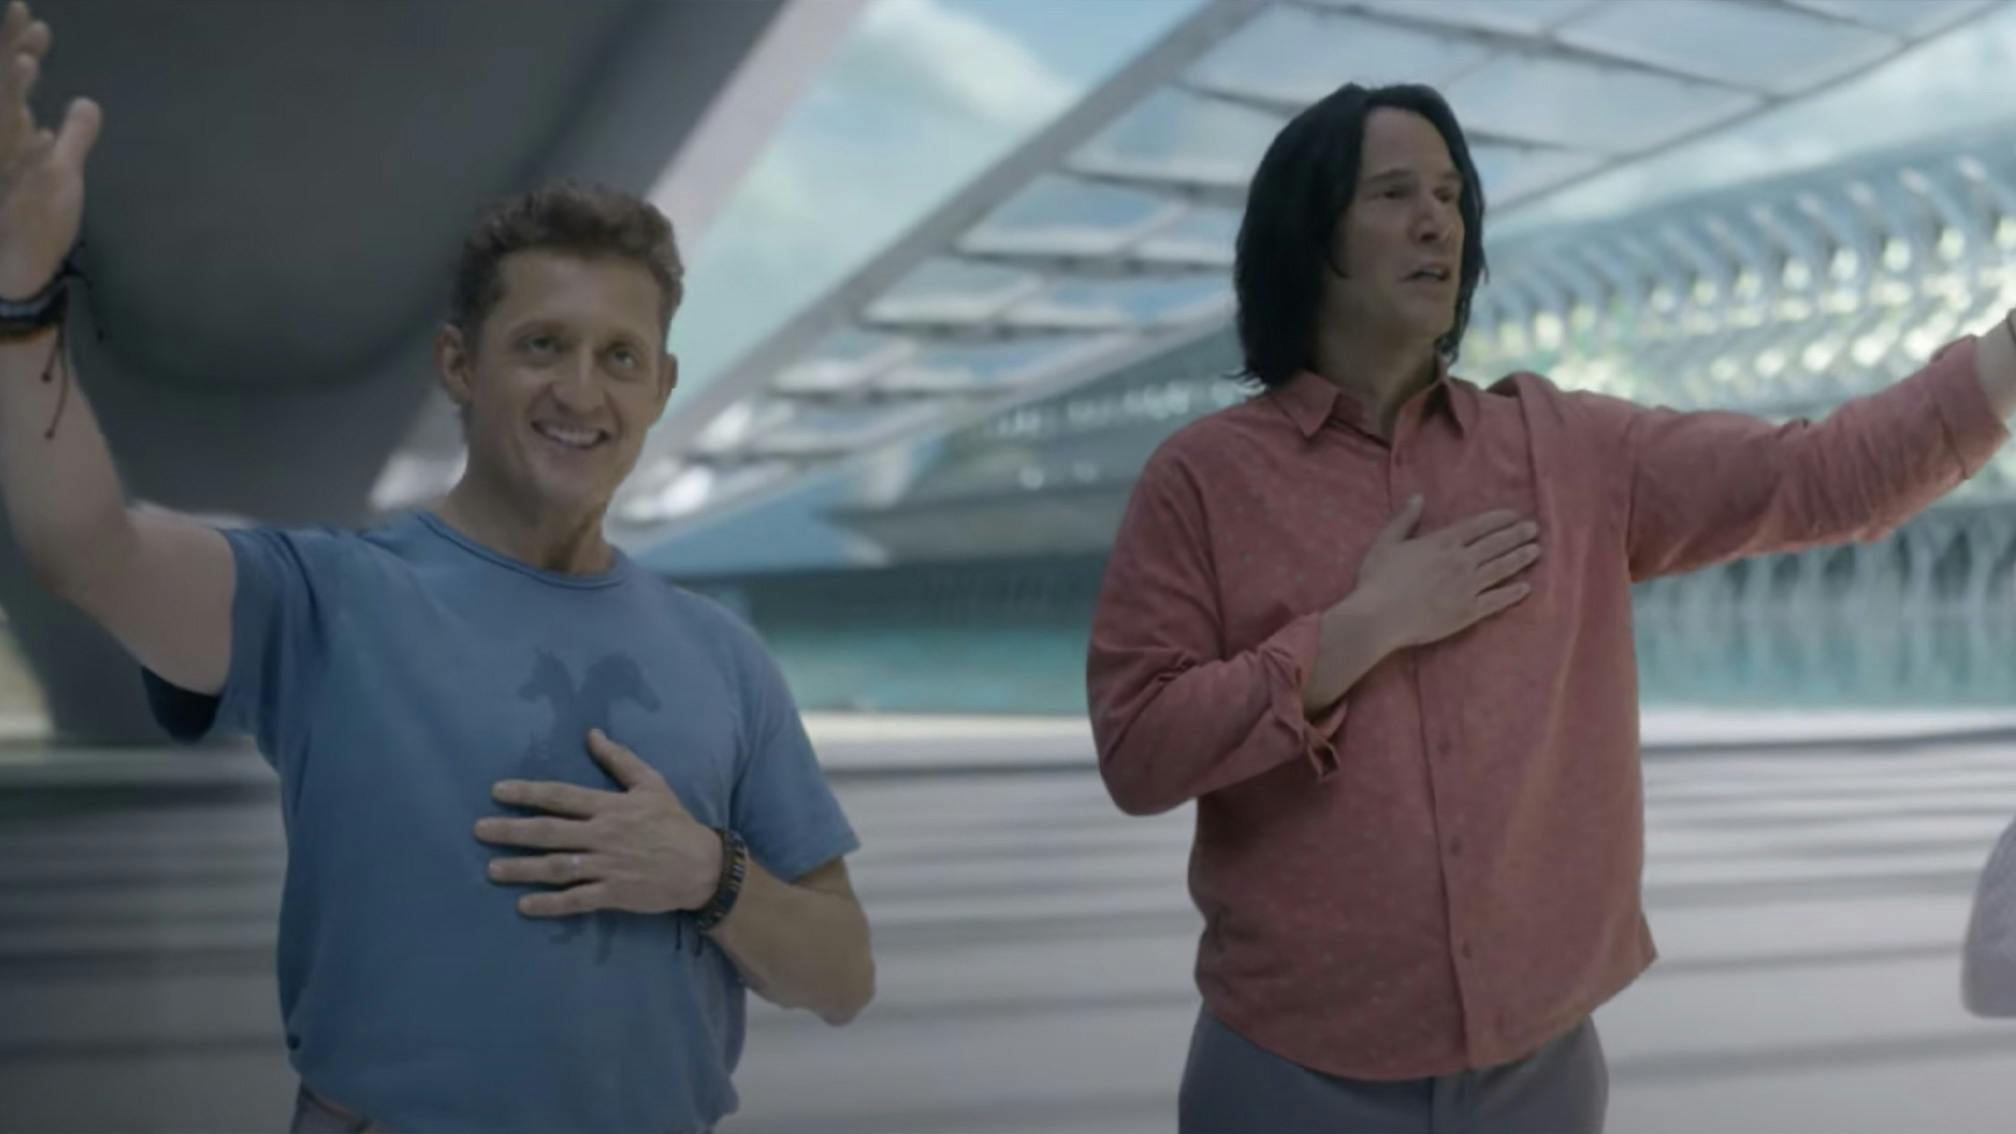 Watch The First Official Trailer For Bill & Ted Face The Music